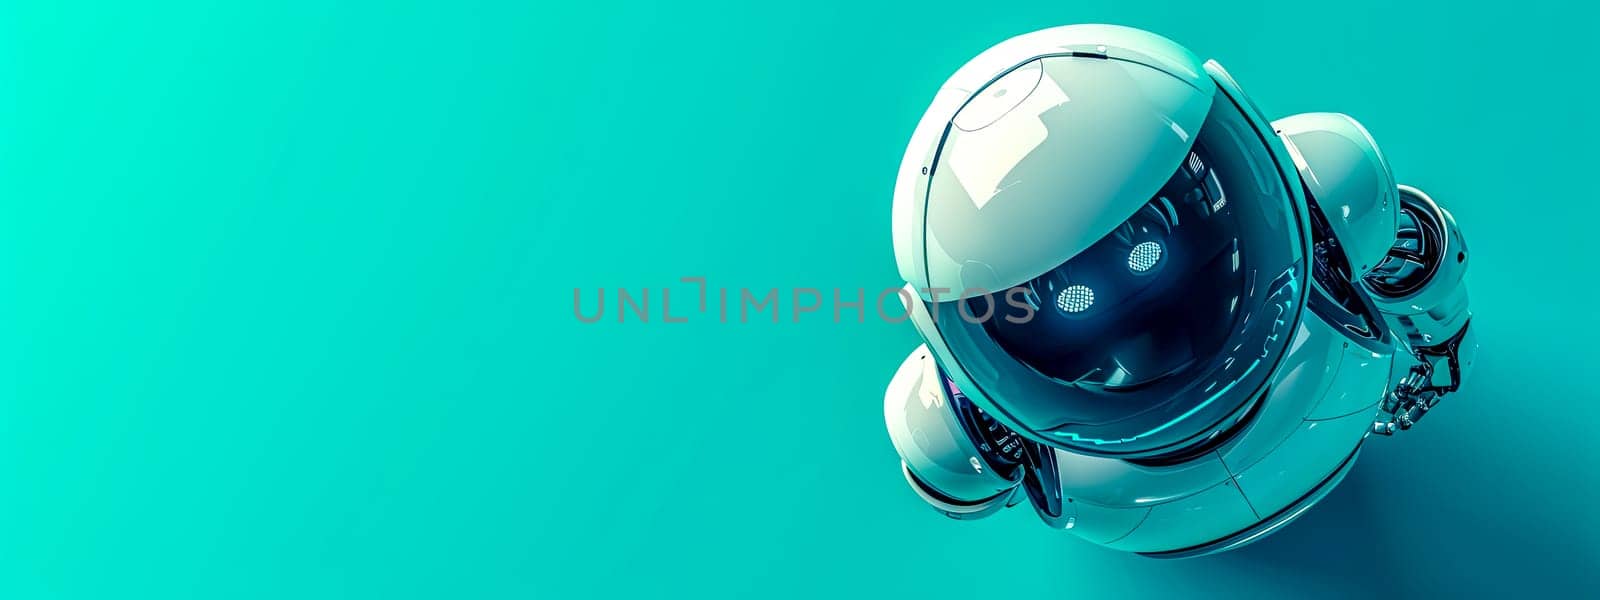 A sleek, futuristic robot with a glossy white helmet and visor, detailed with intricate mechanical parts, turquoise background, exemplifying advanced technology and artificial intelligence by Edophoto